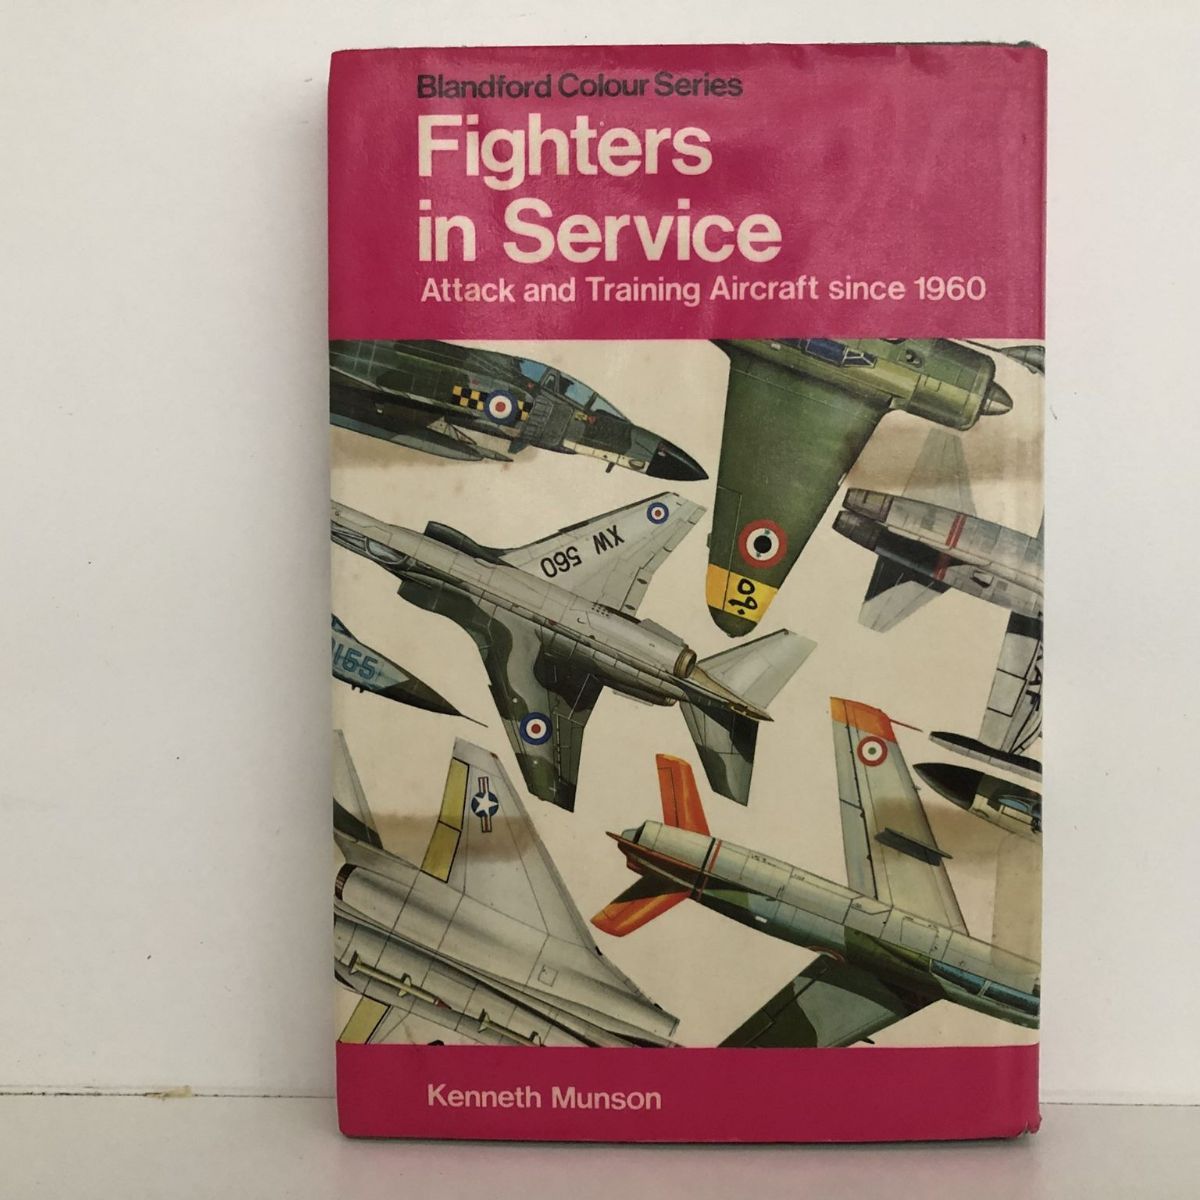 FIGHTERS IN SERVICE: Attack and Training Aircraft since 1960